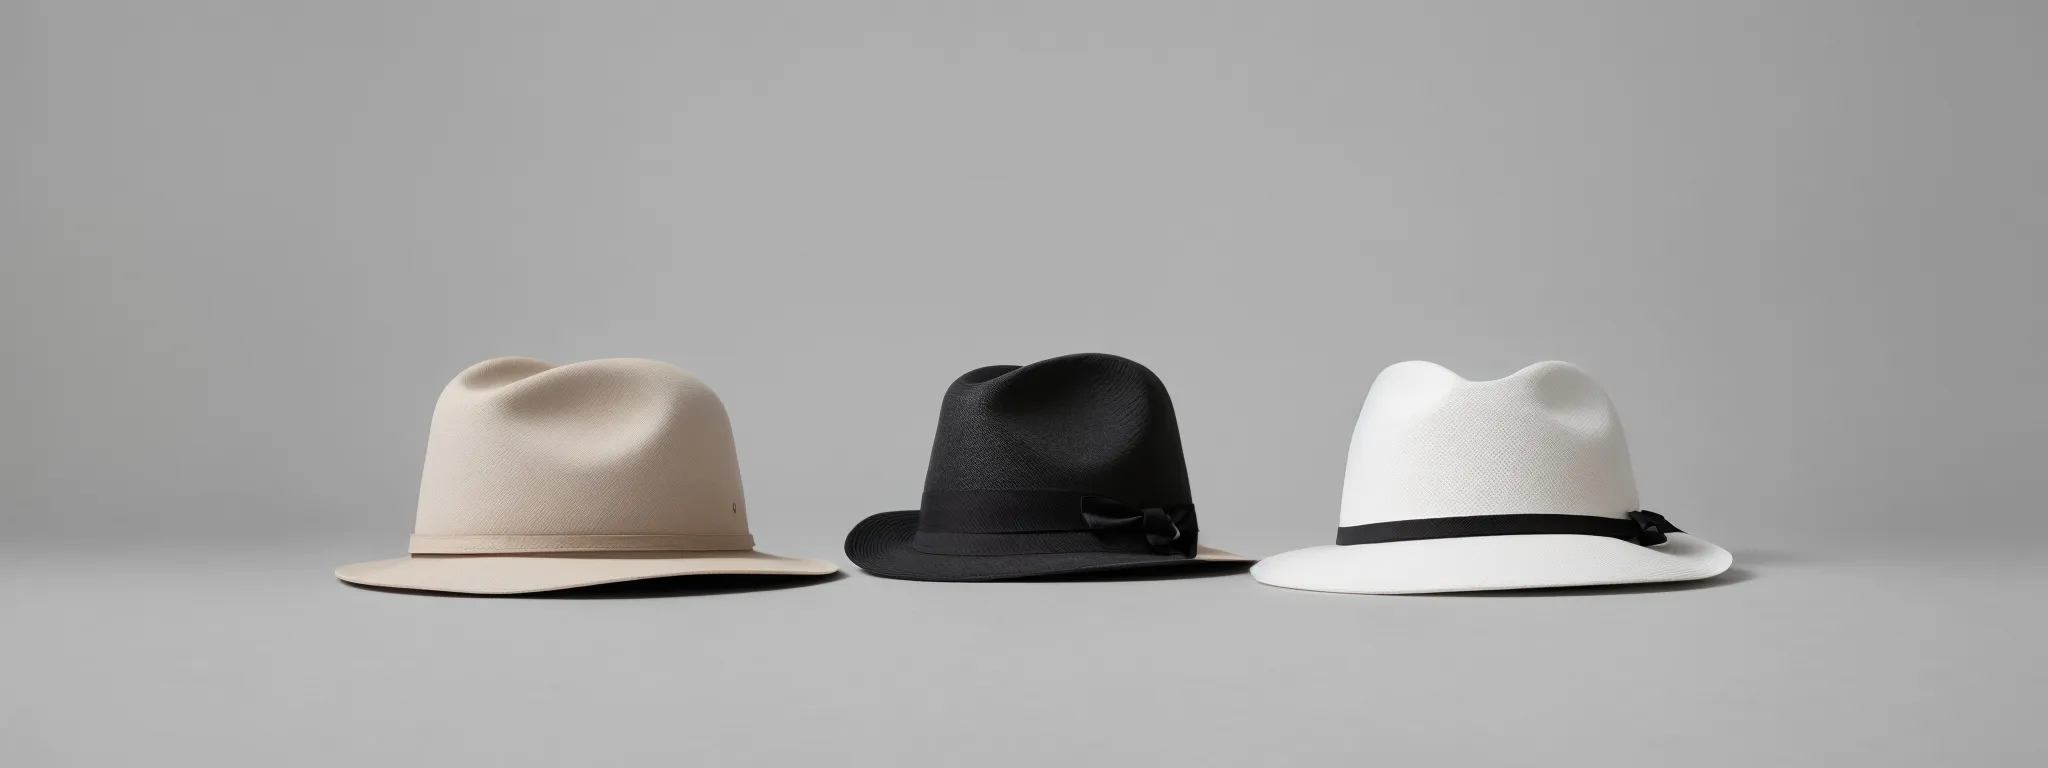 three distinguishable hats in black, white, and gray placed side by side on a plain surface, each representing a different seo strategy.